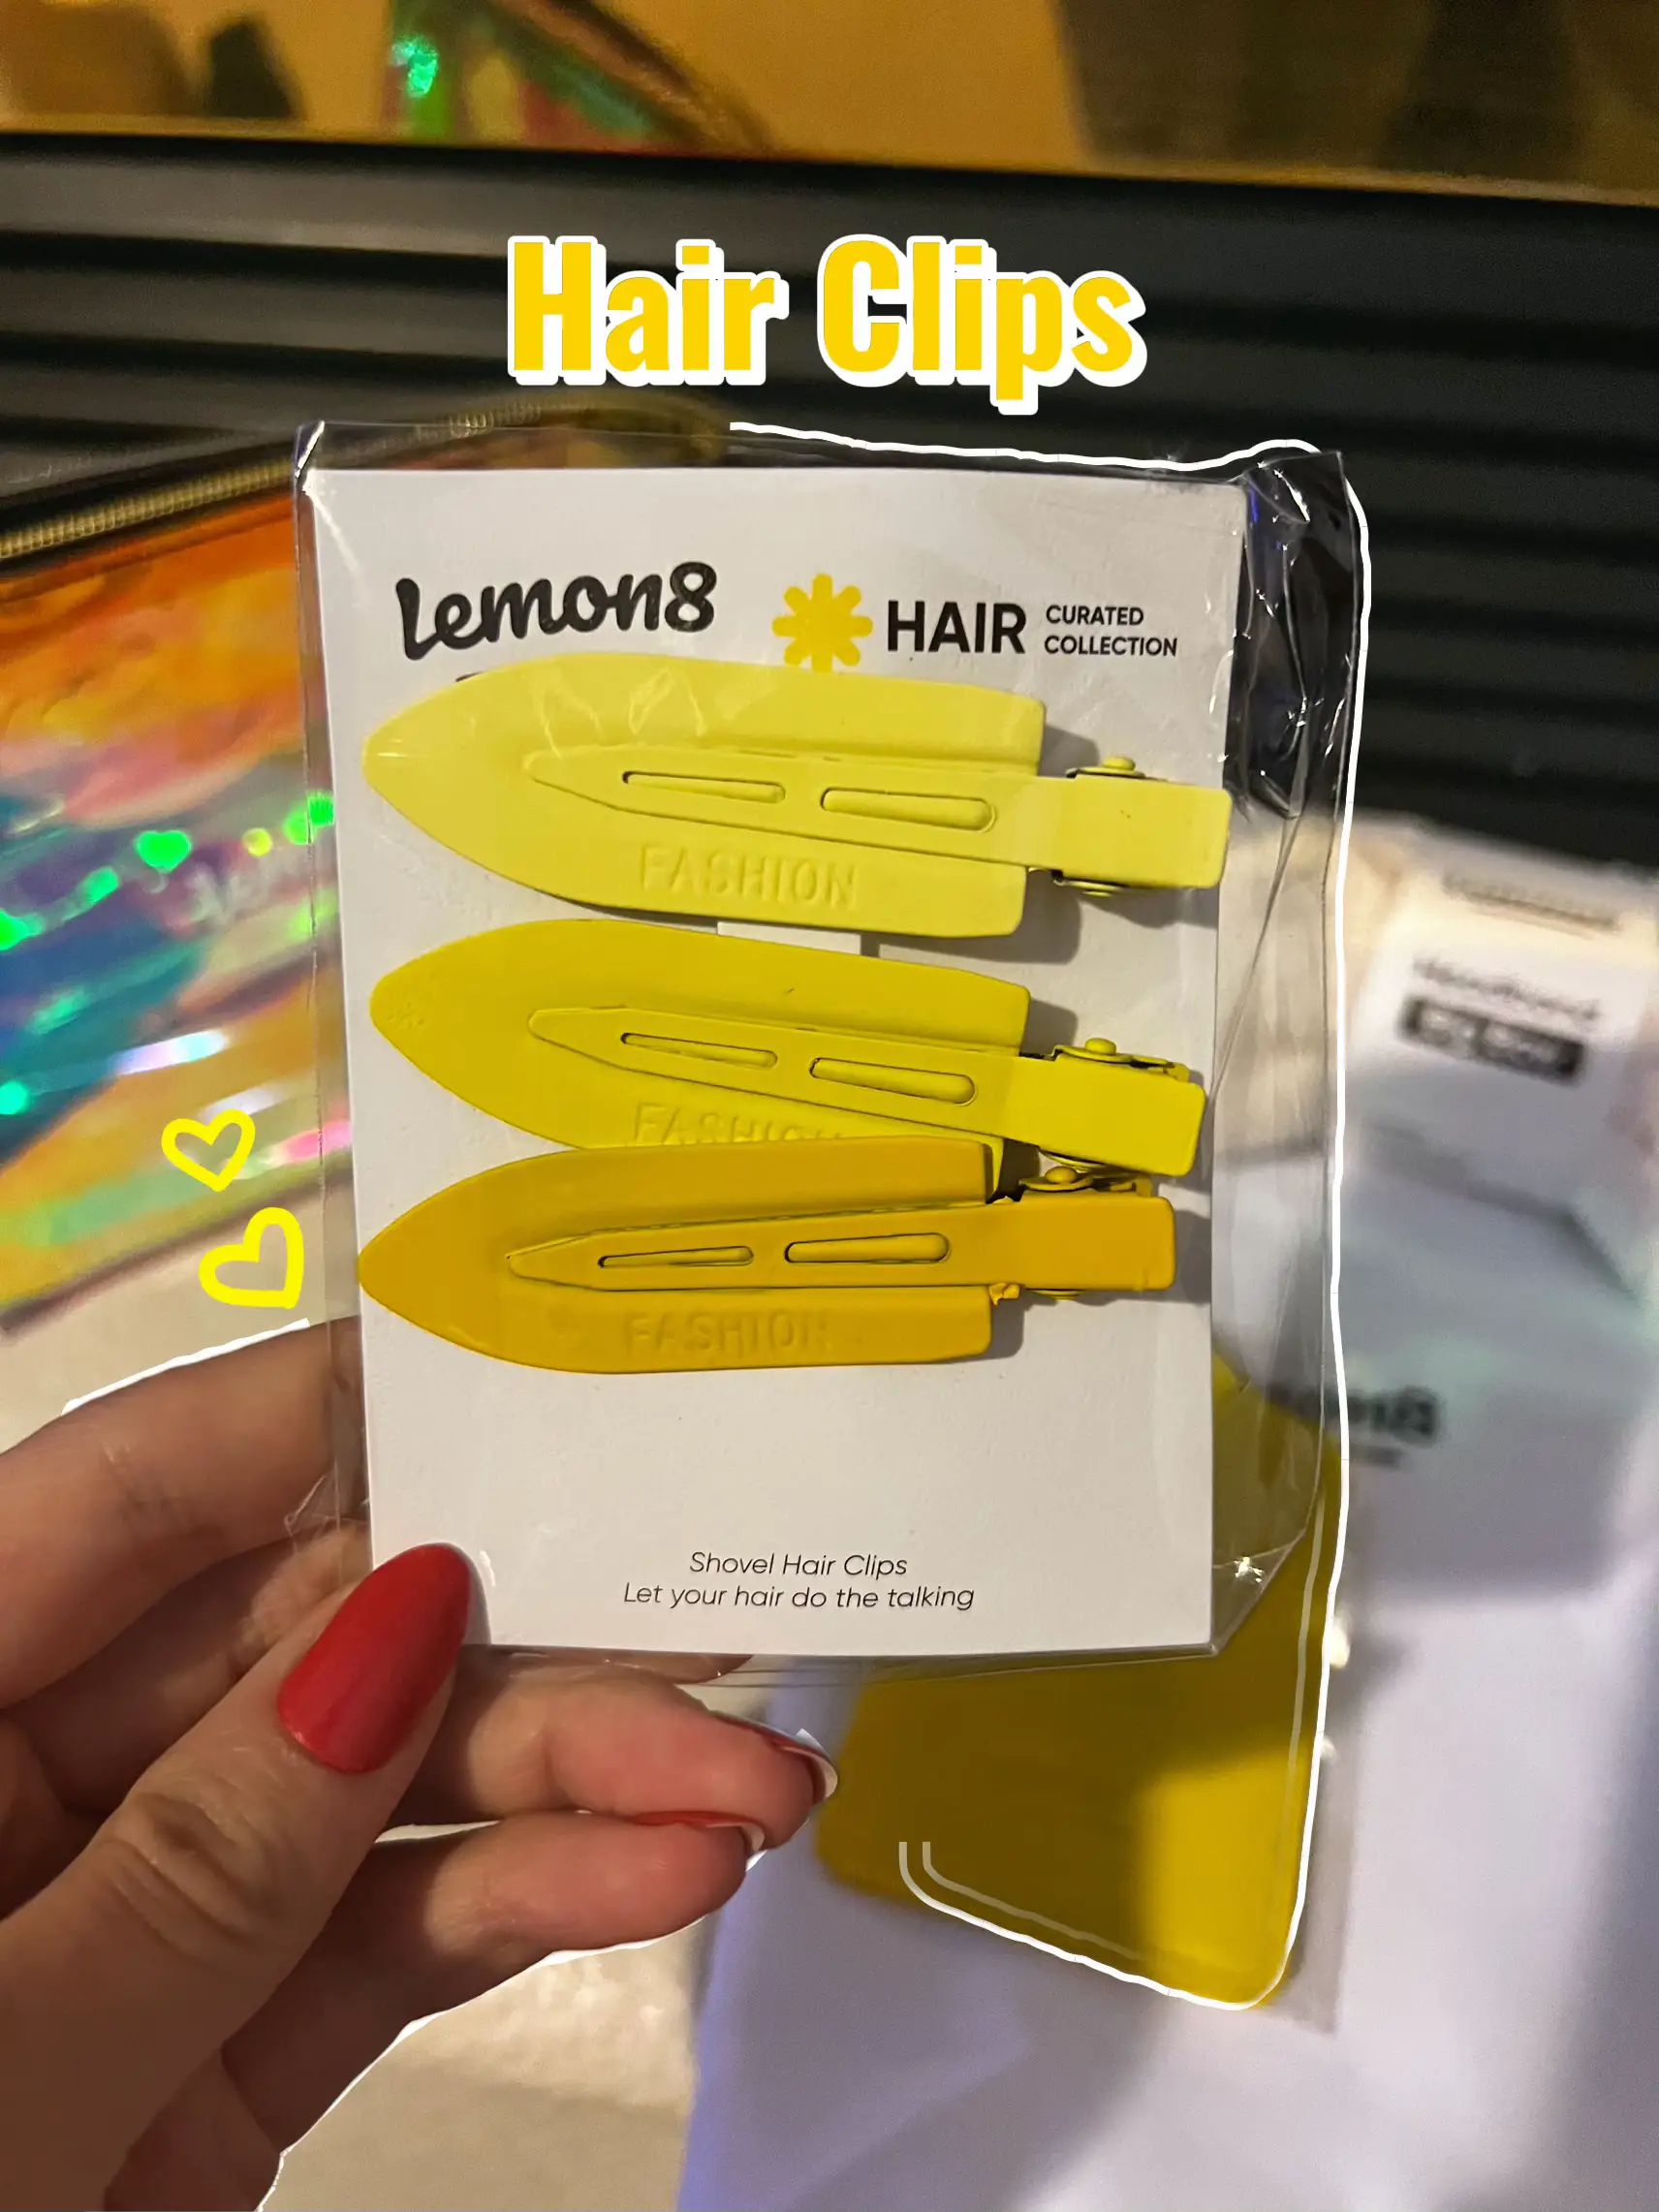  A person is holding a box of hair clips by Lemon8.